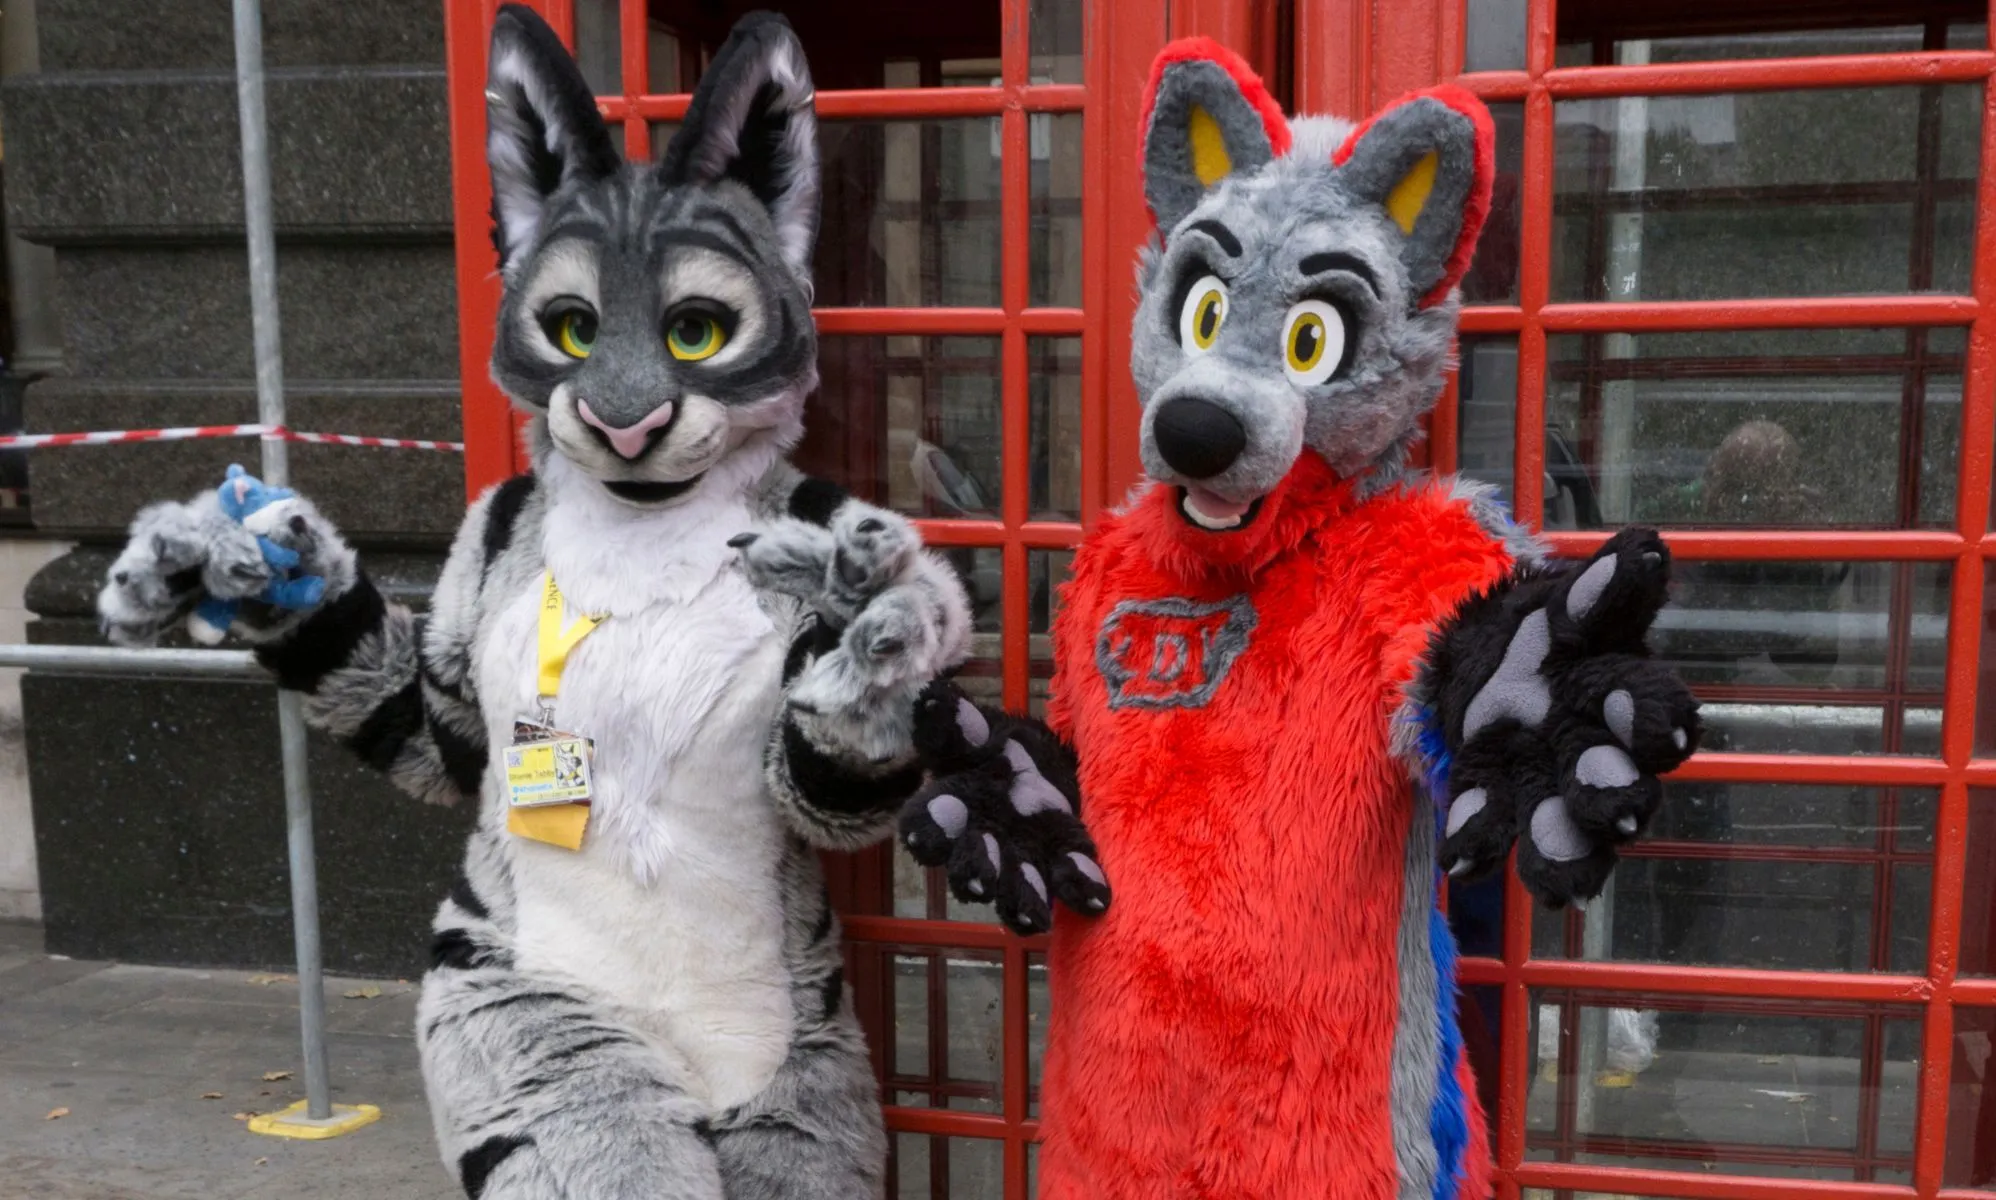 Gay furry hackers infiltrate nuclear lab for research into cat-girls